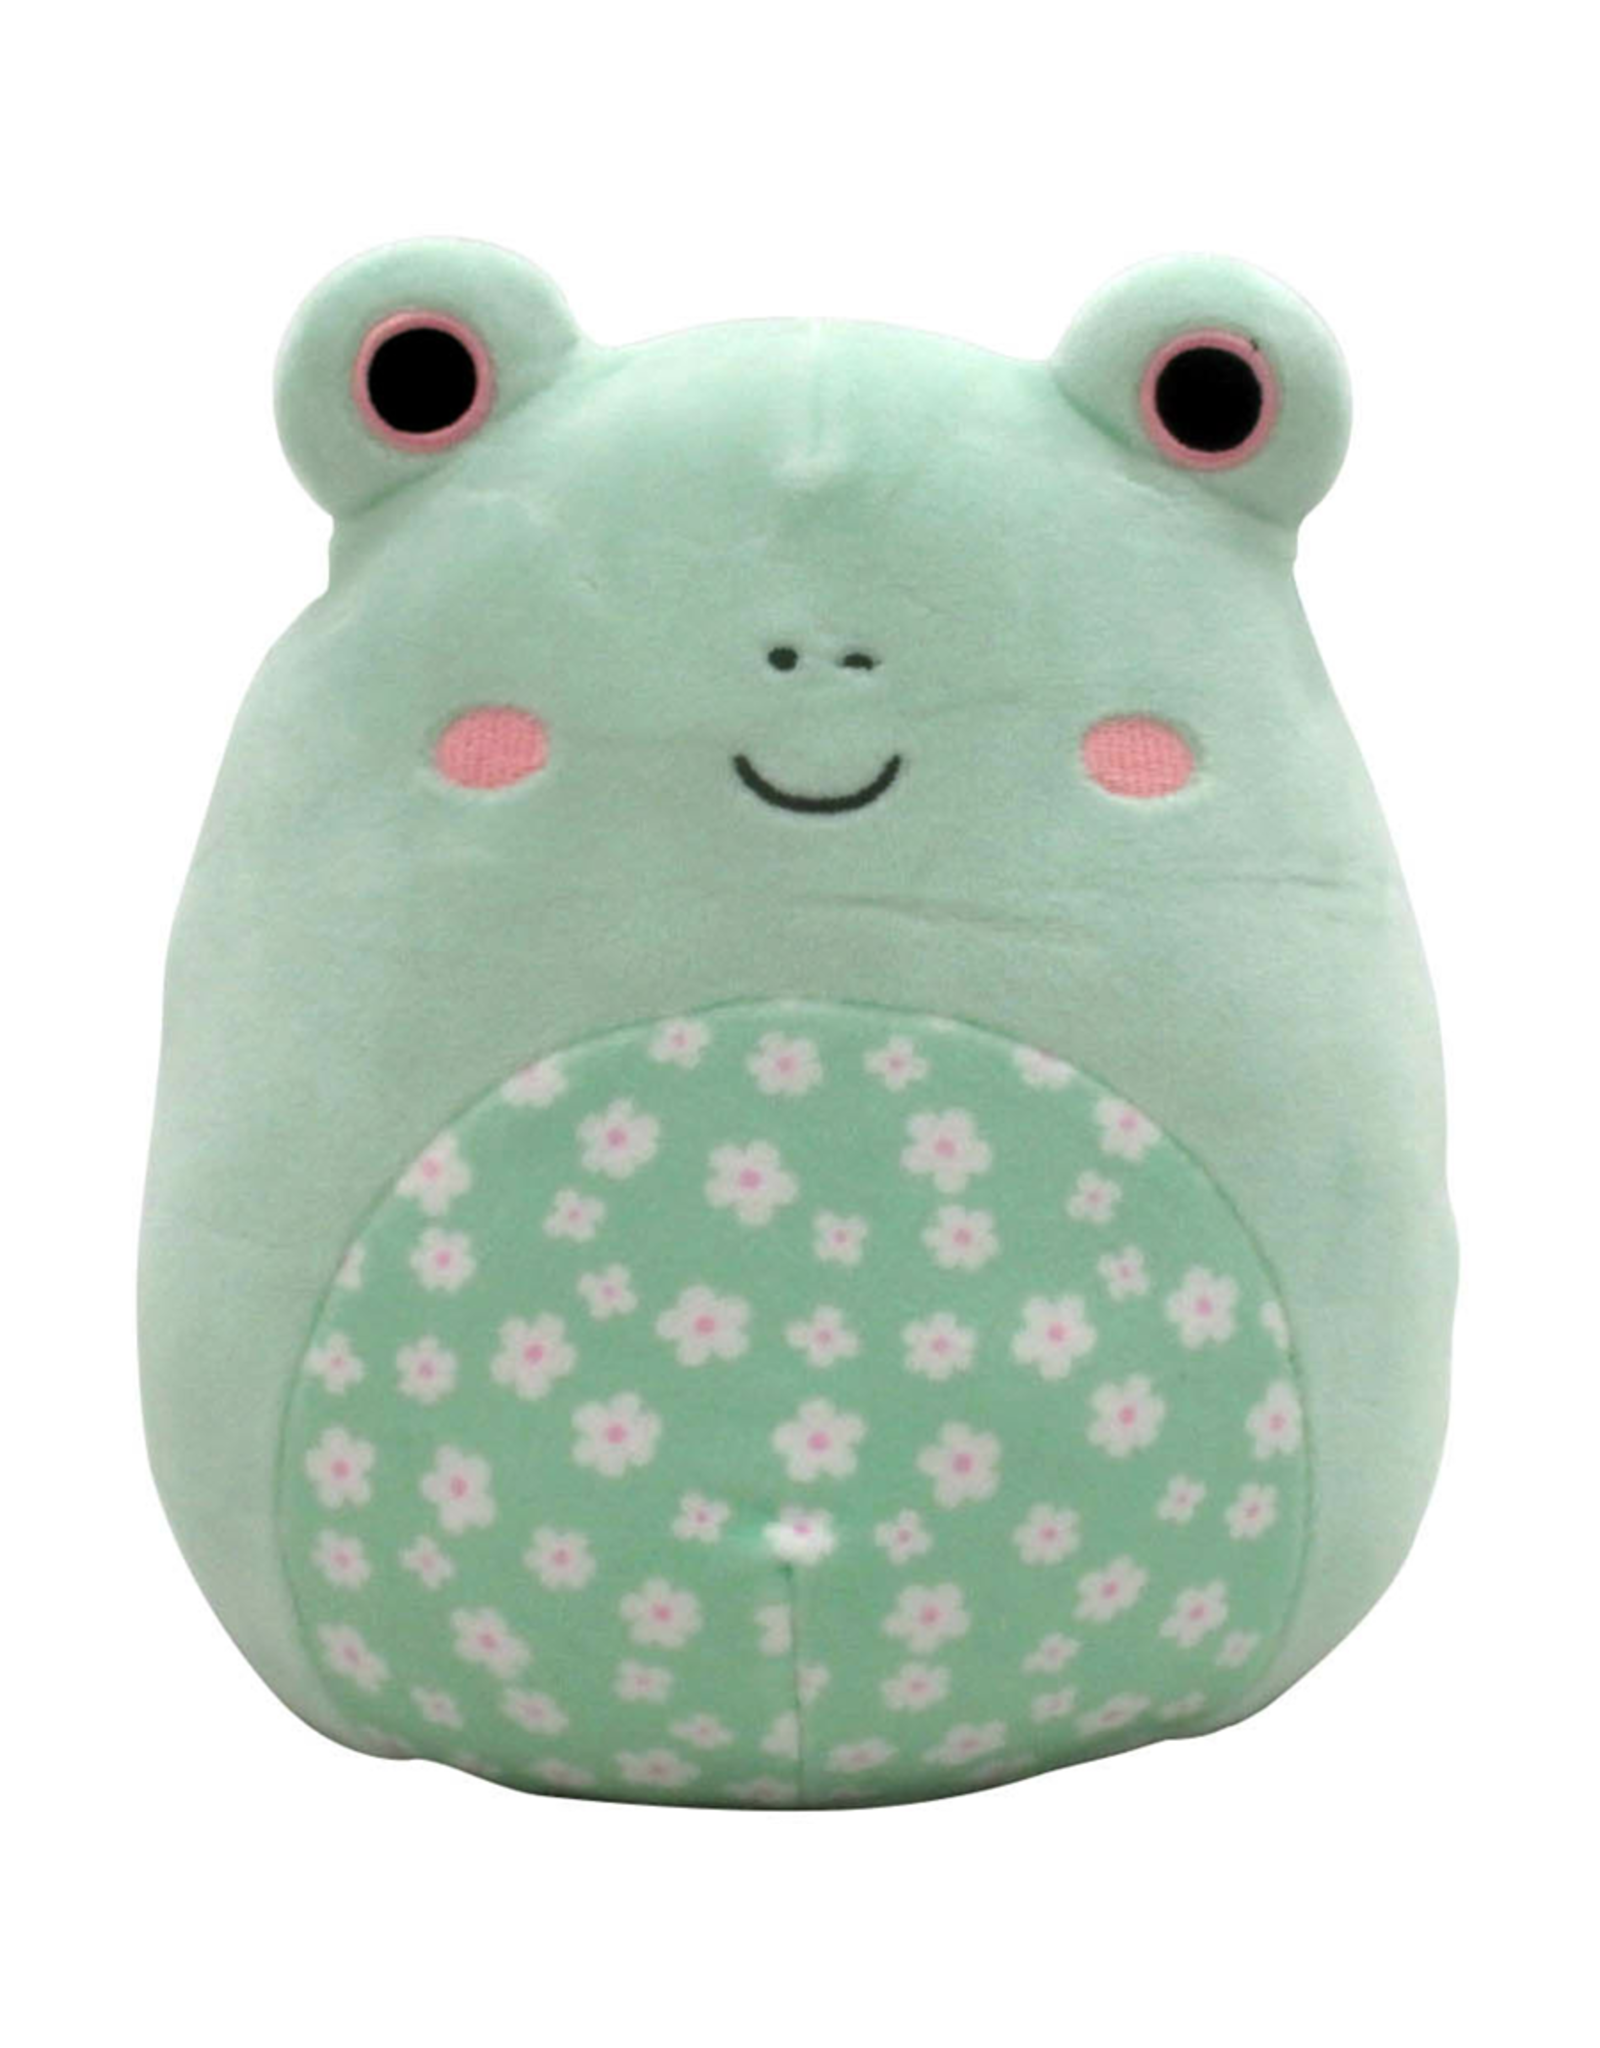 Squishmallows 5" Floral Squishmallows Assorted